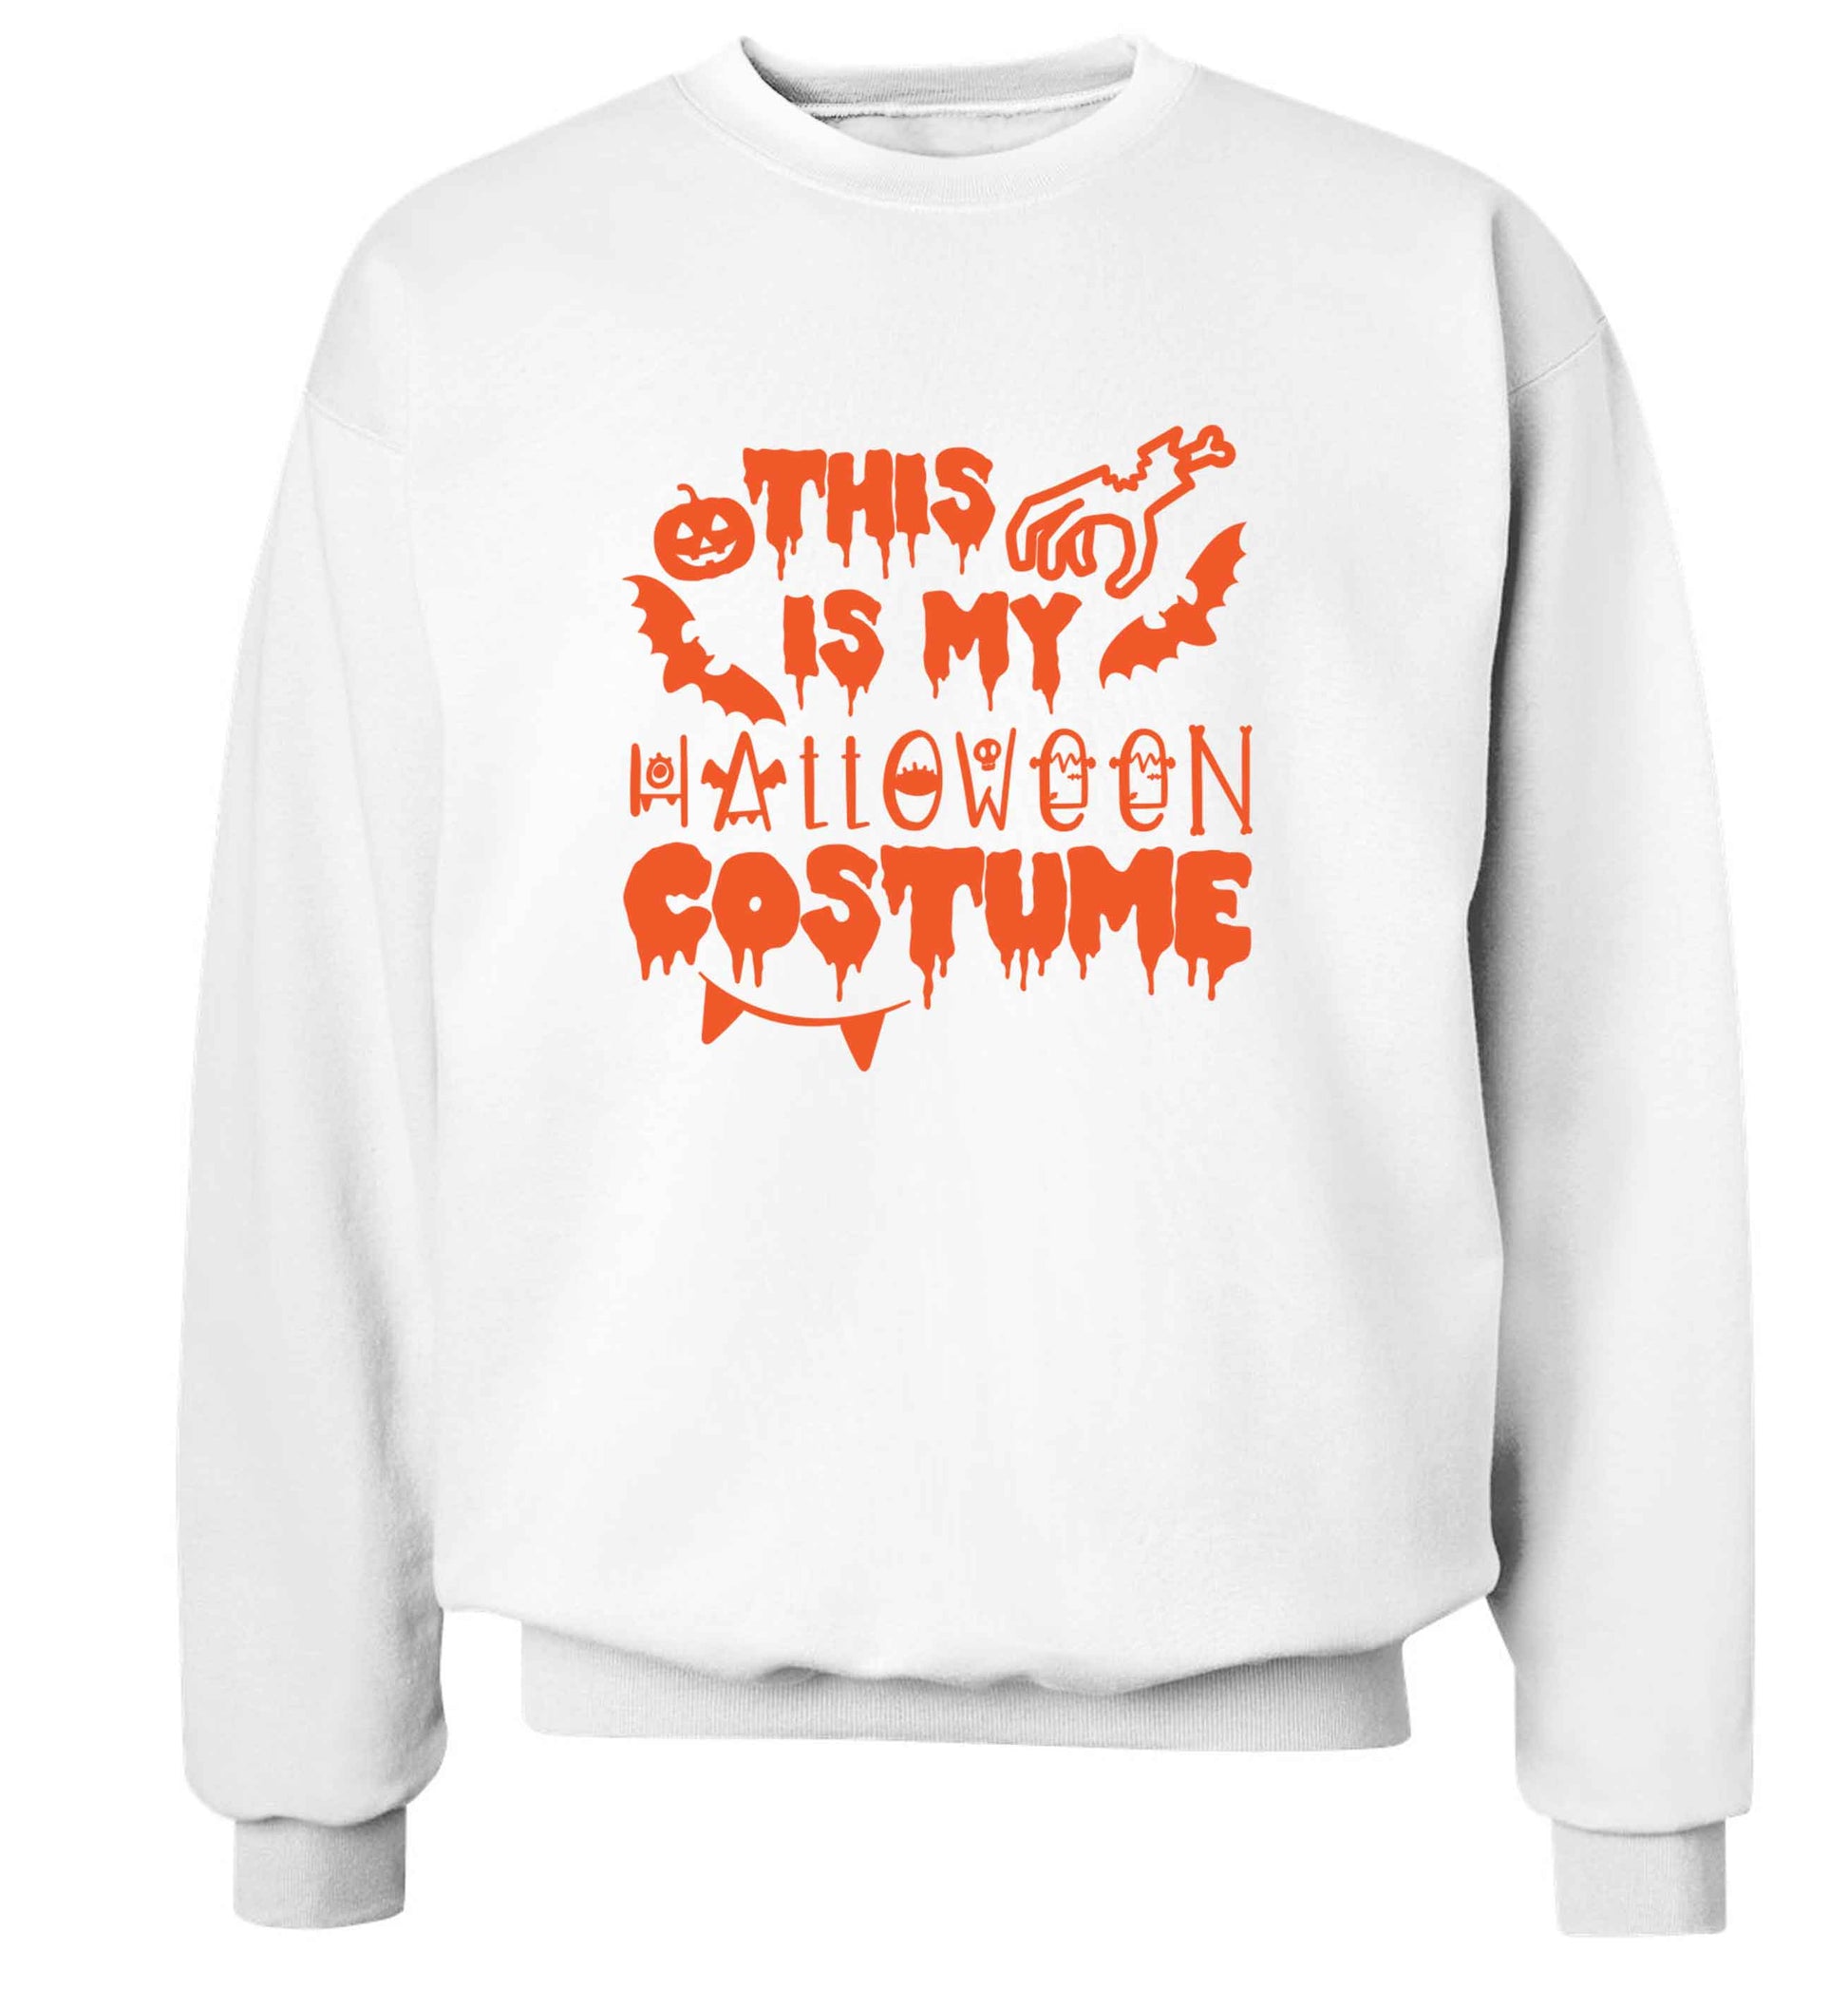 This is my halloween costume adult's unisex white sweater 2XL